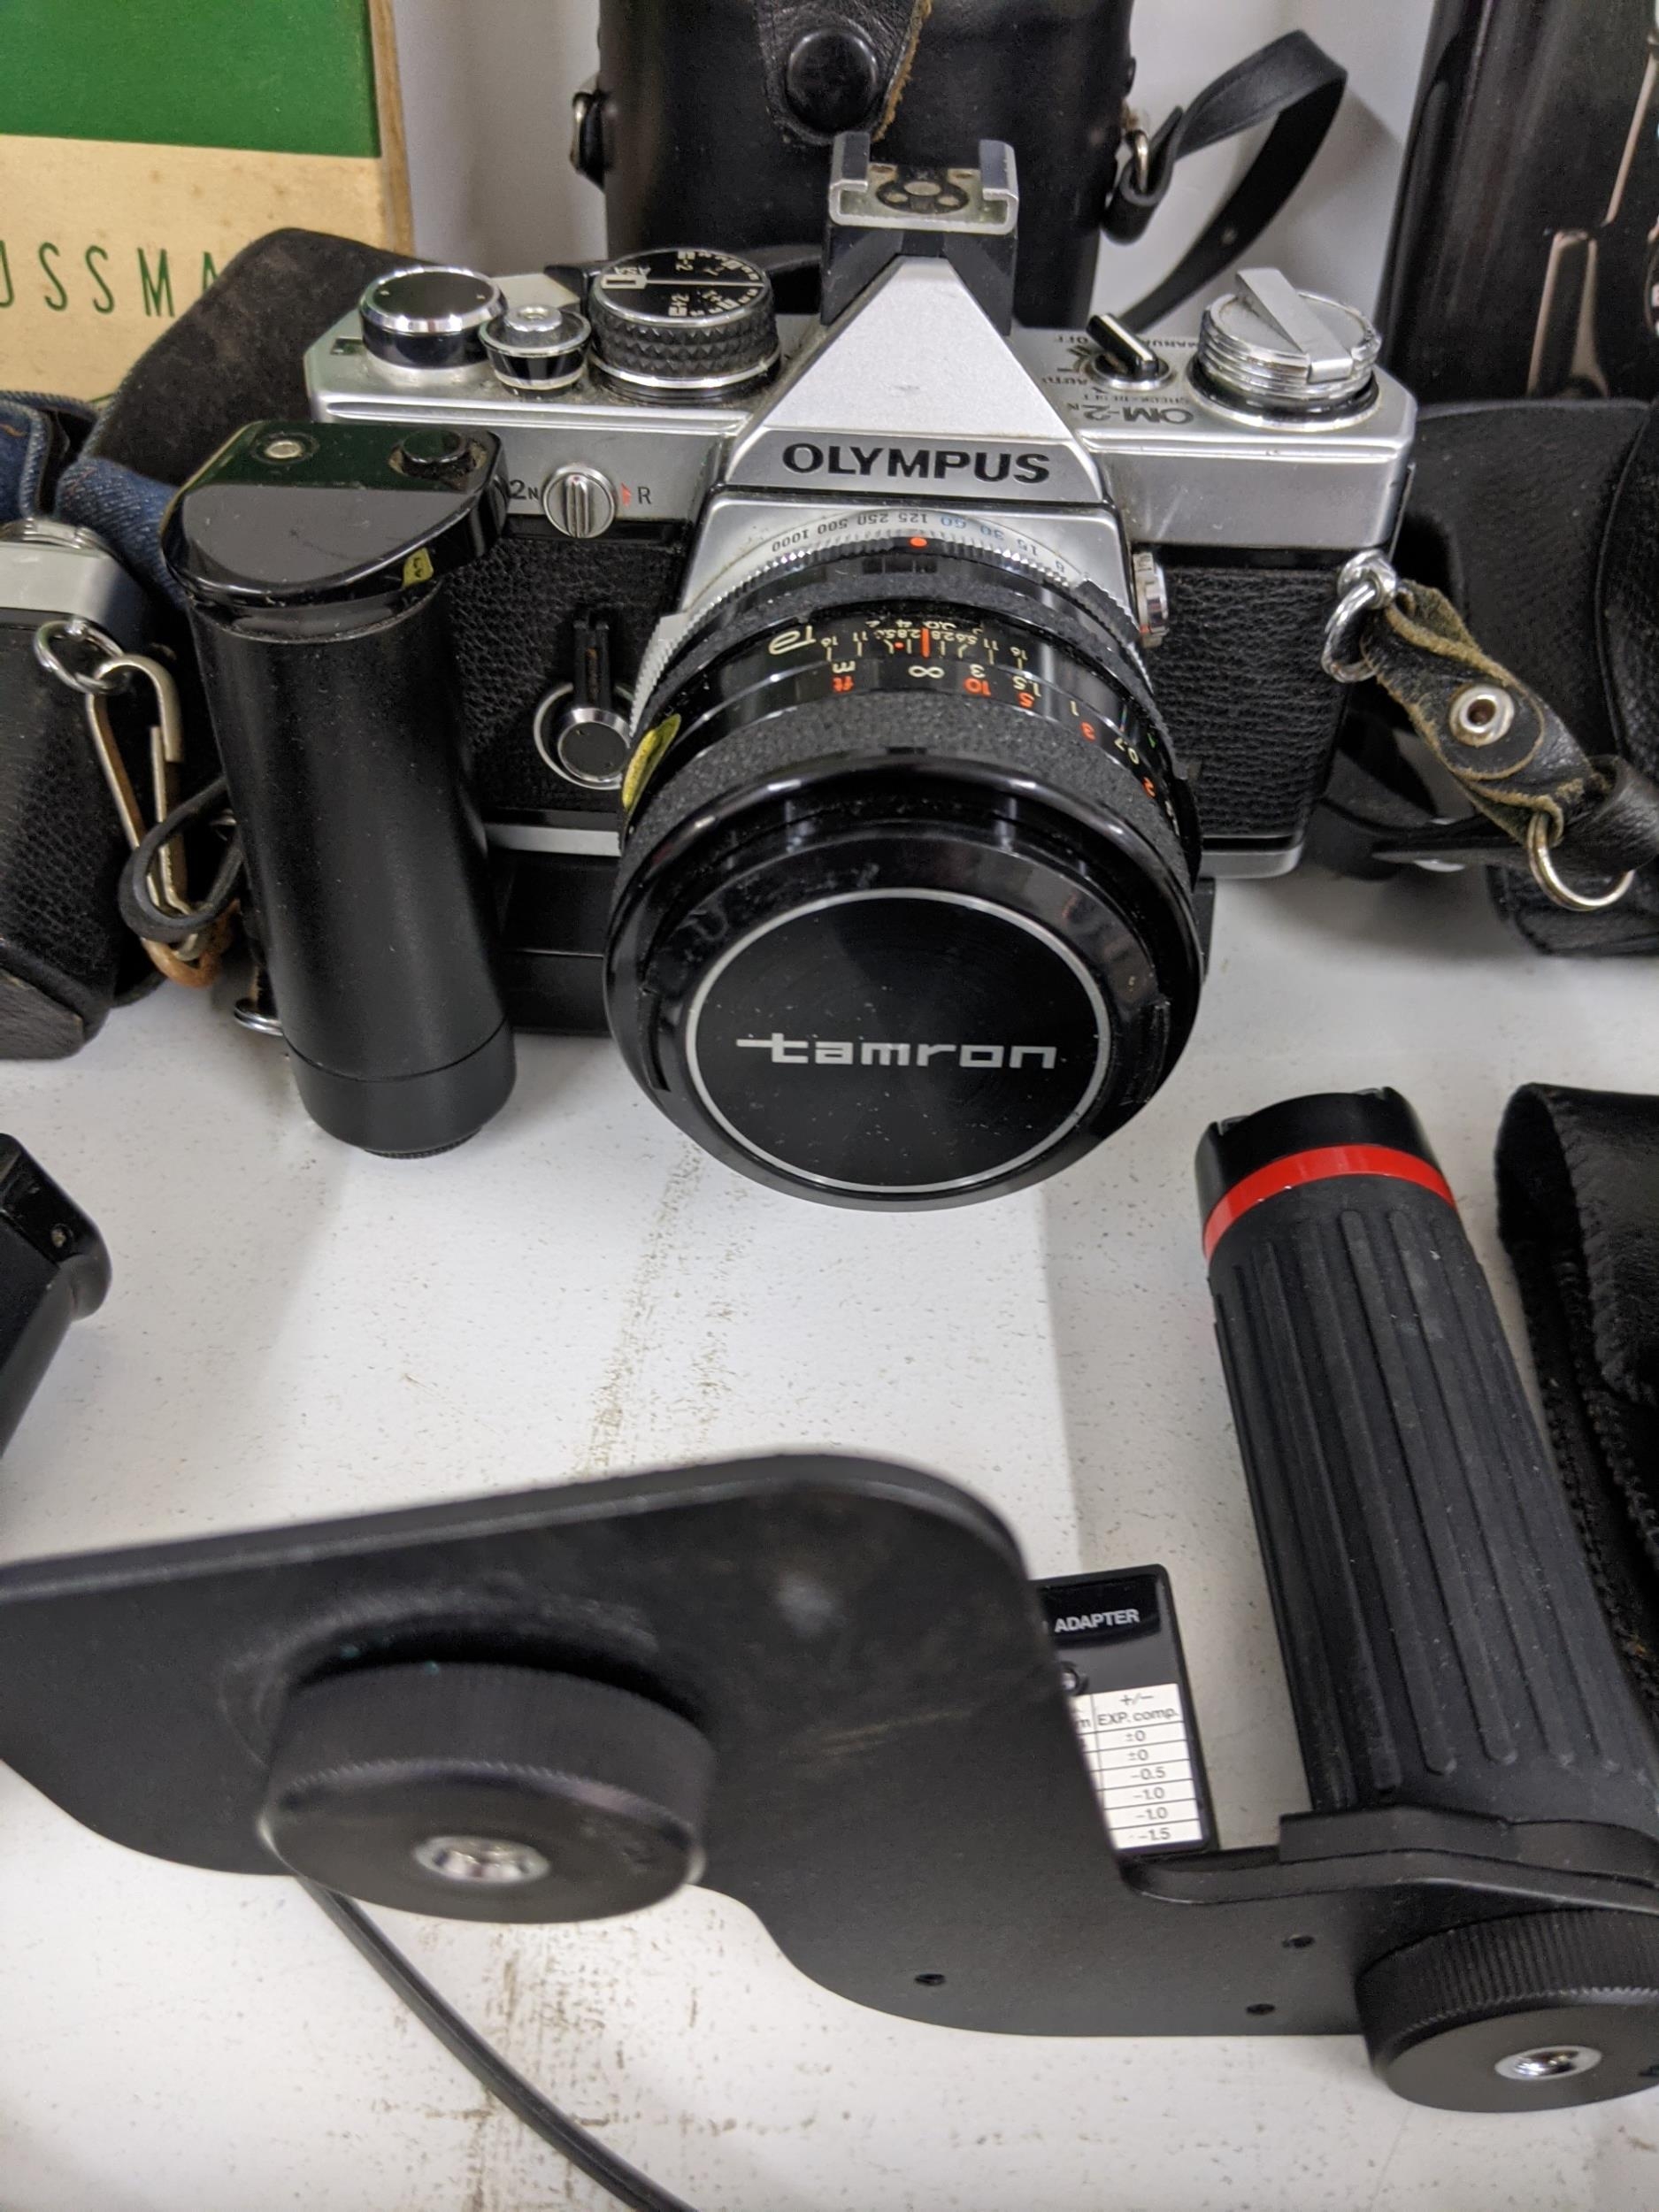 Olympus cameras, equipment and photography accessories to include two Olympus OM-2s, an Olympus OM- - Image 6 of 10